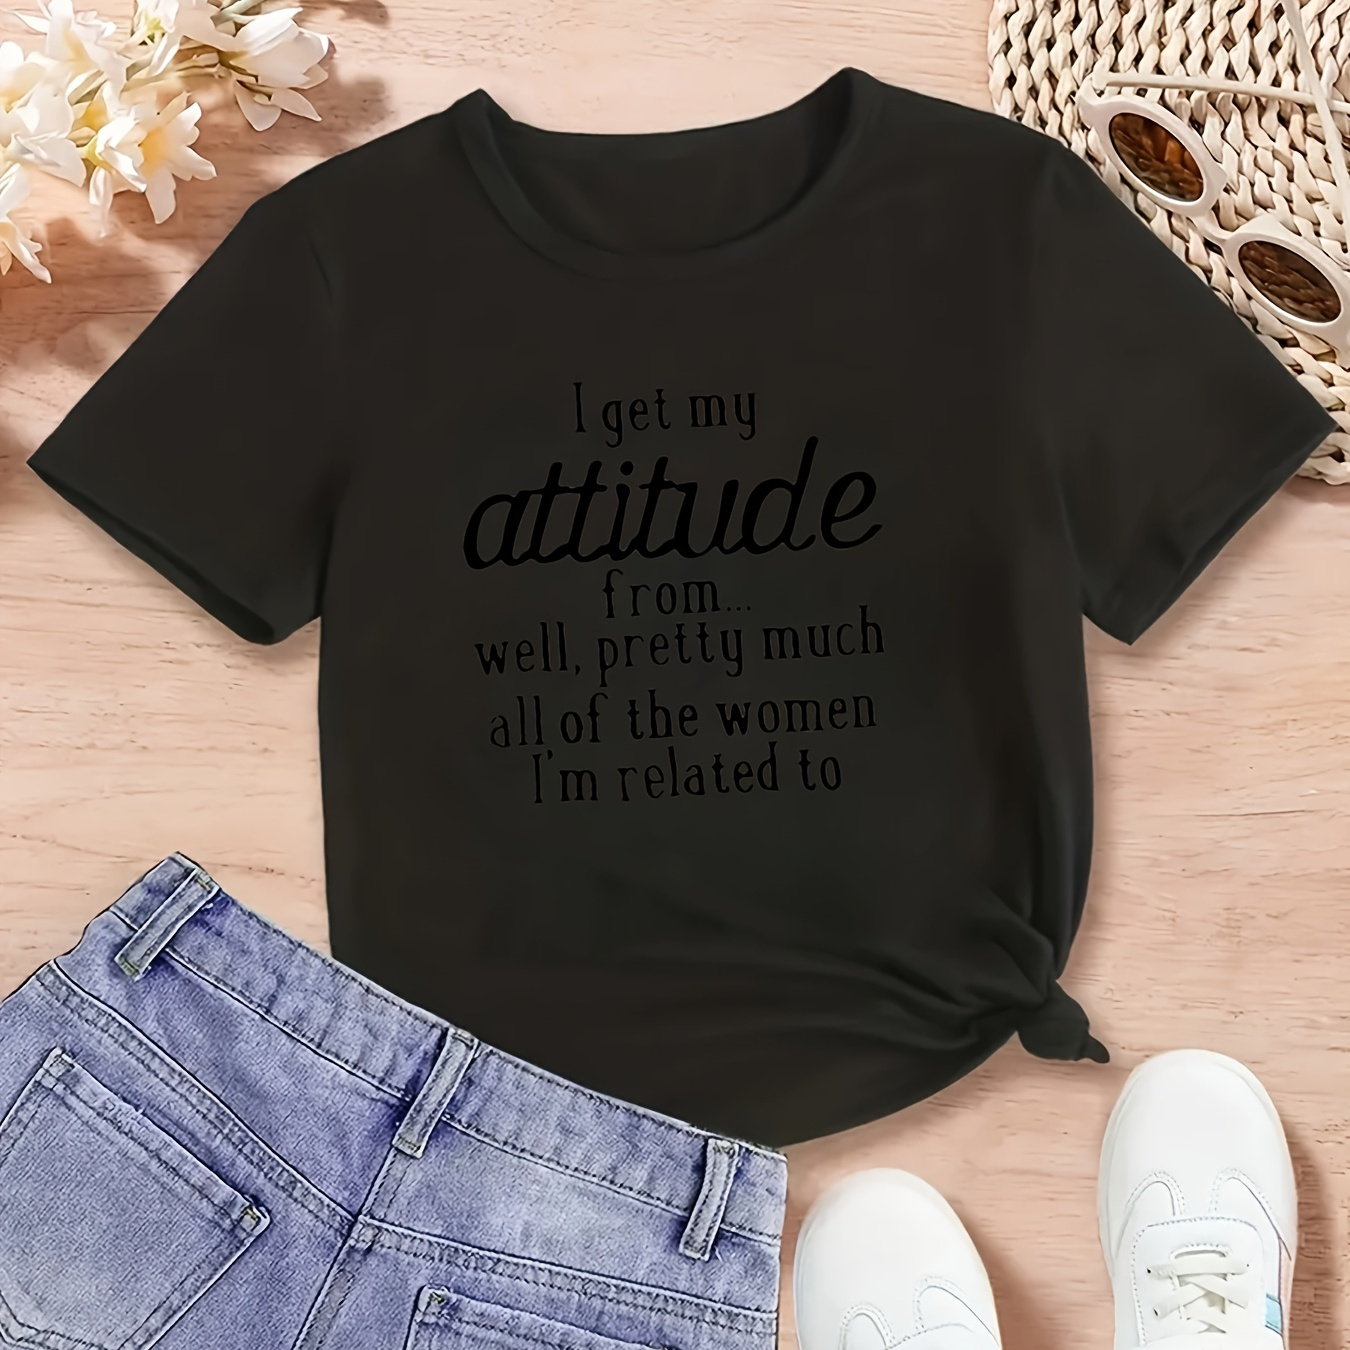 

Fun 'get My Attitude From' Summer Graphic T-shirt For Girls, Cotton Comfy Short Sleeve Tee For A Trendy Look!